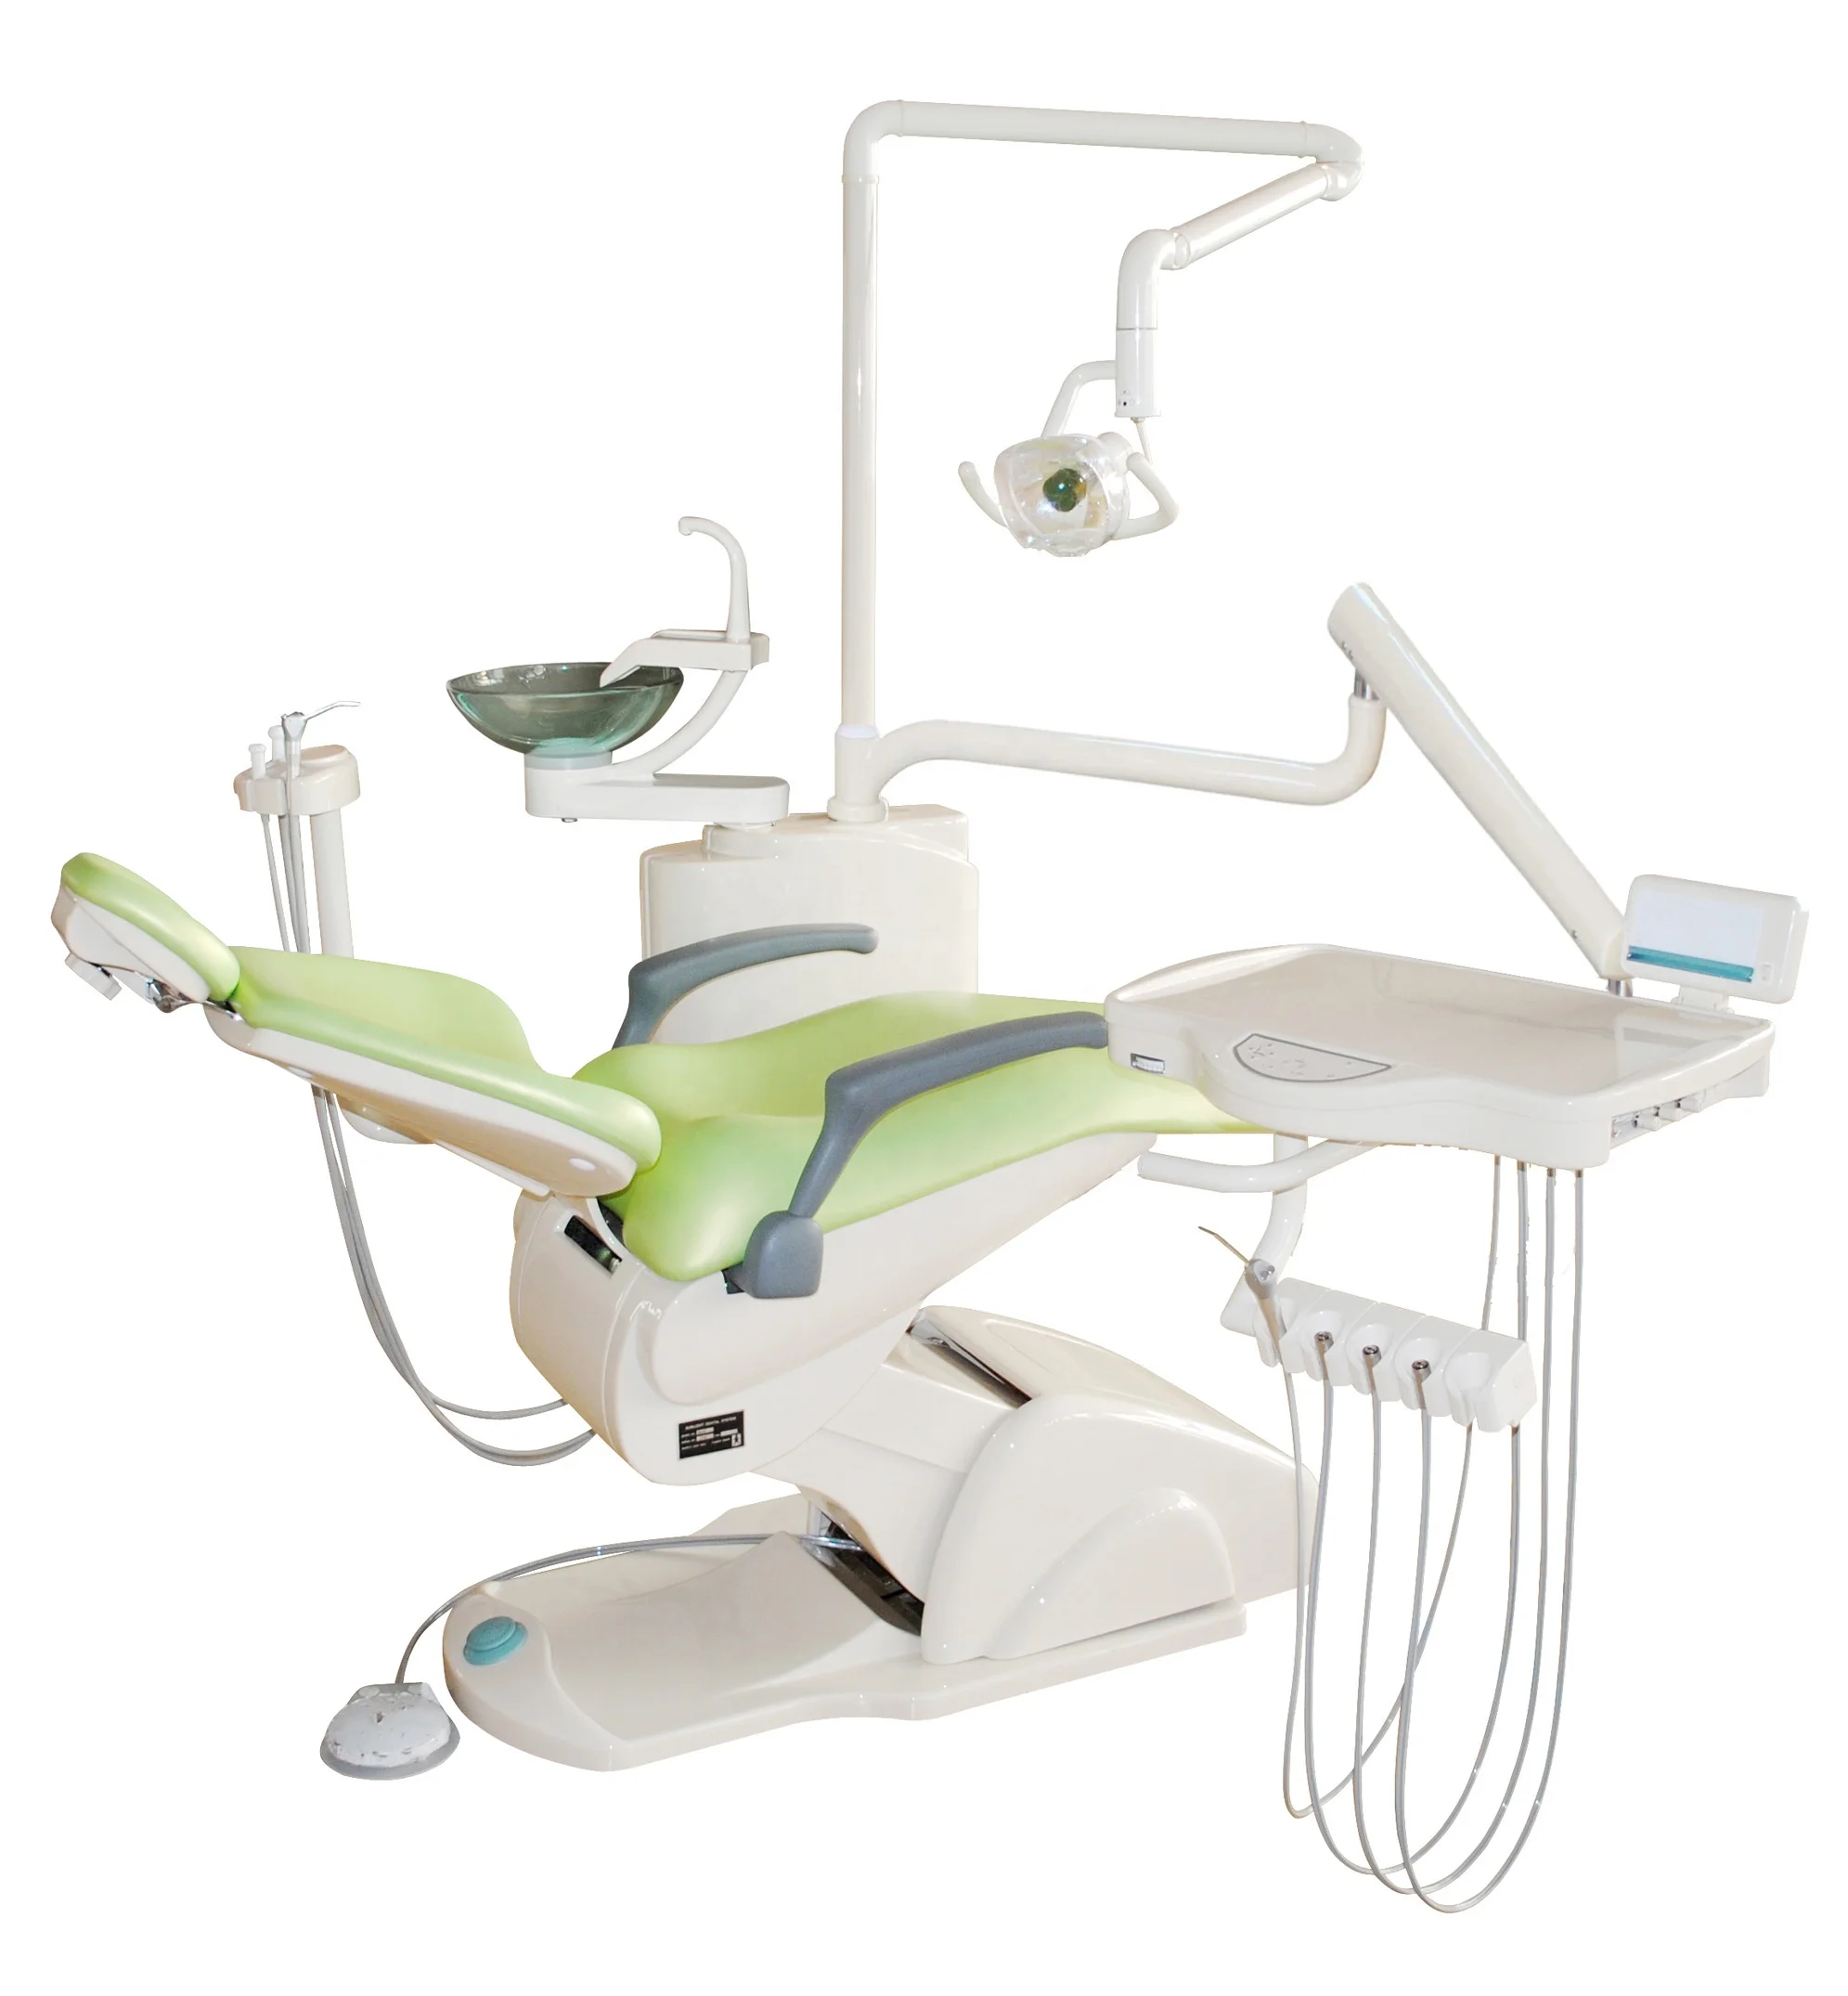 Widely Used Clinic Dental Chair Sale Chinese Chairs Buy Good Price Clinic Dental Chair Sale